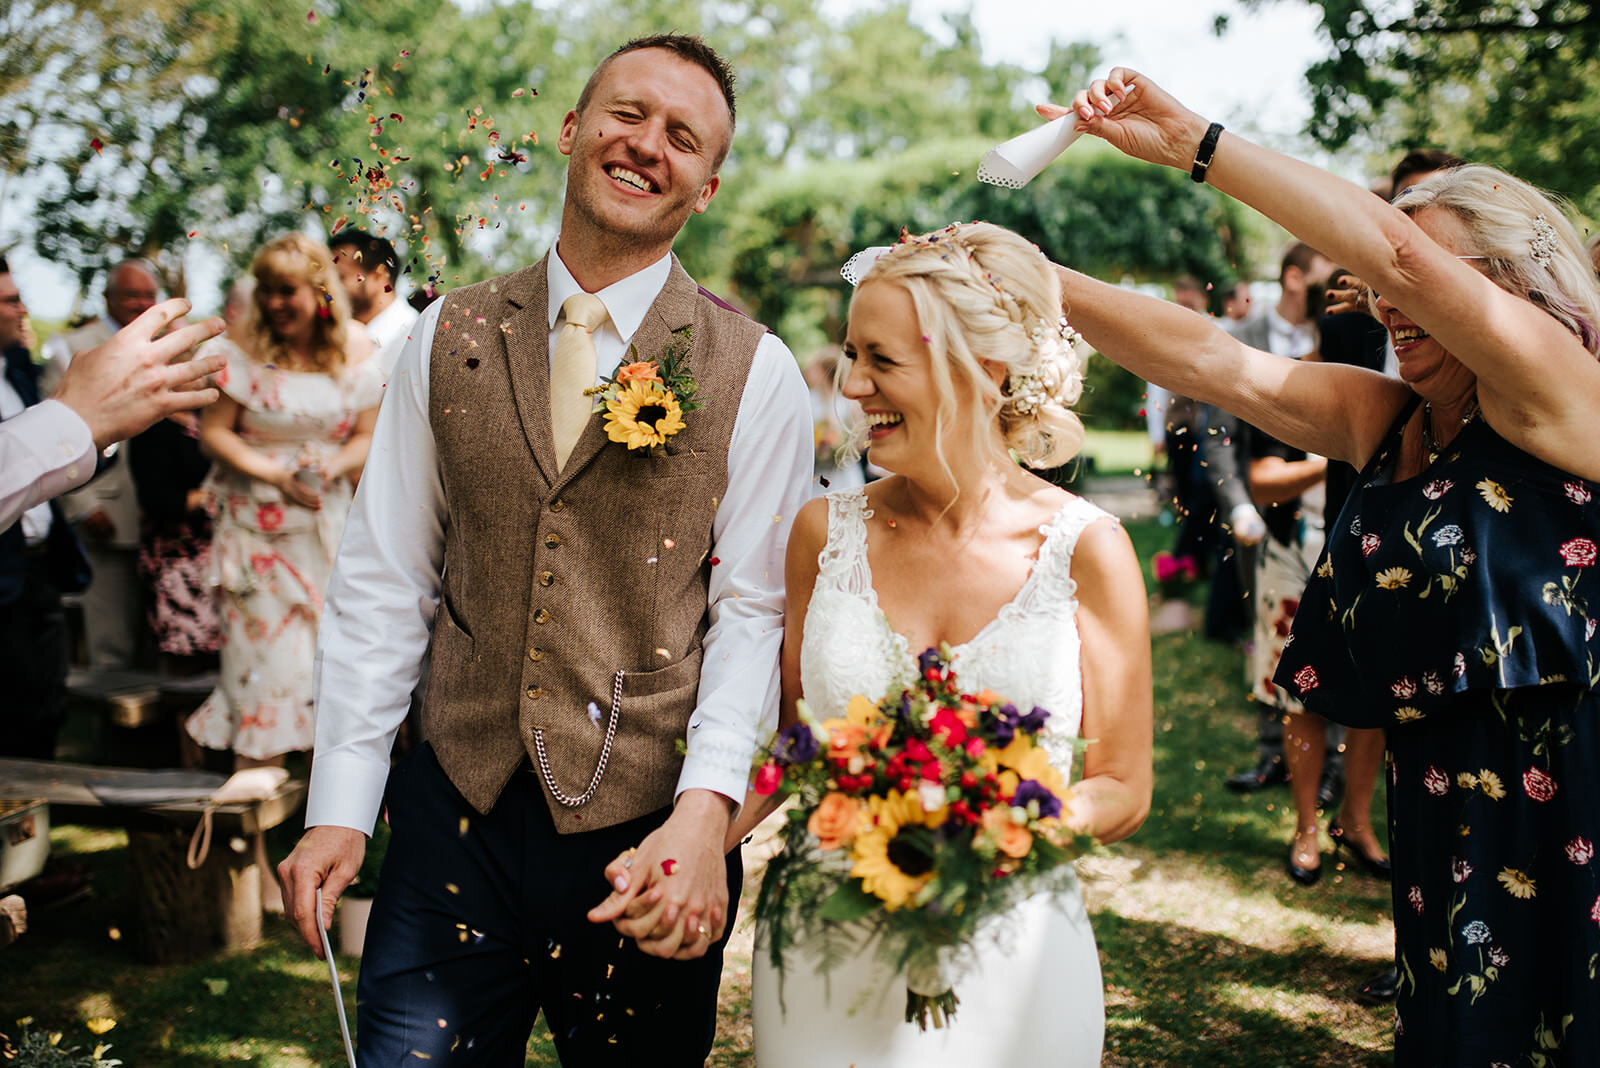 Bride and groom walk down the aisle as guests throw confetti at them. Groom smiles as he nearly avoids getting confetti in the face. 